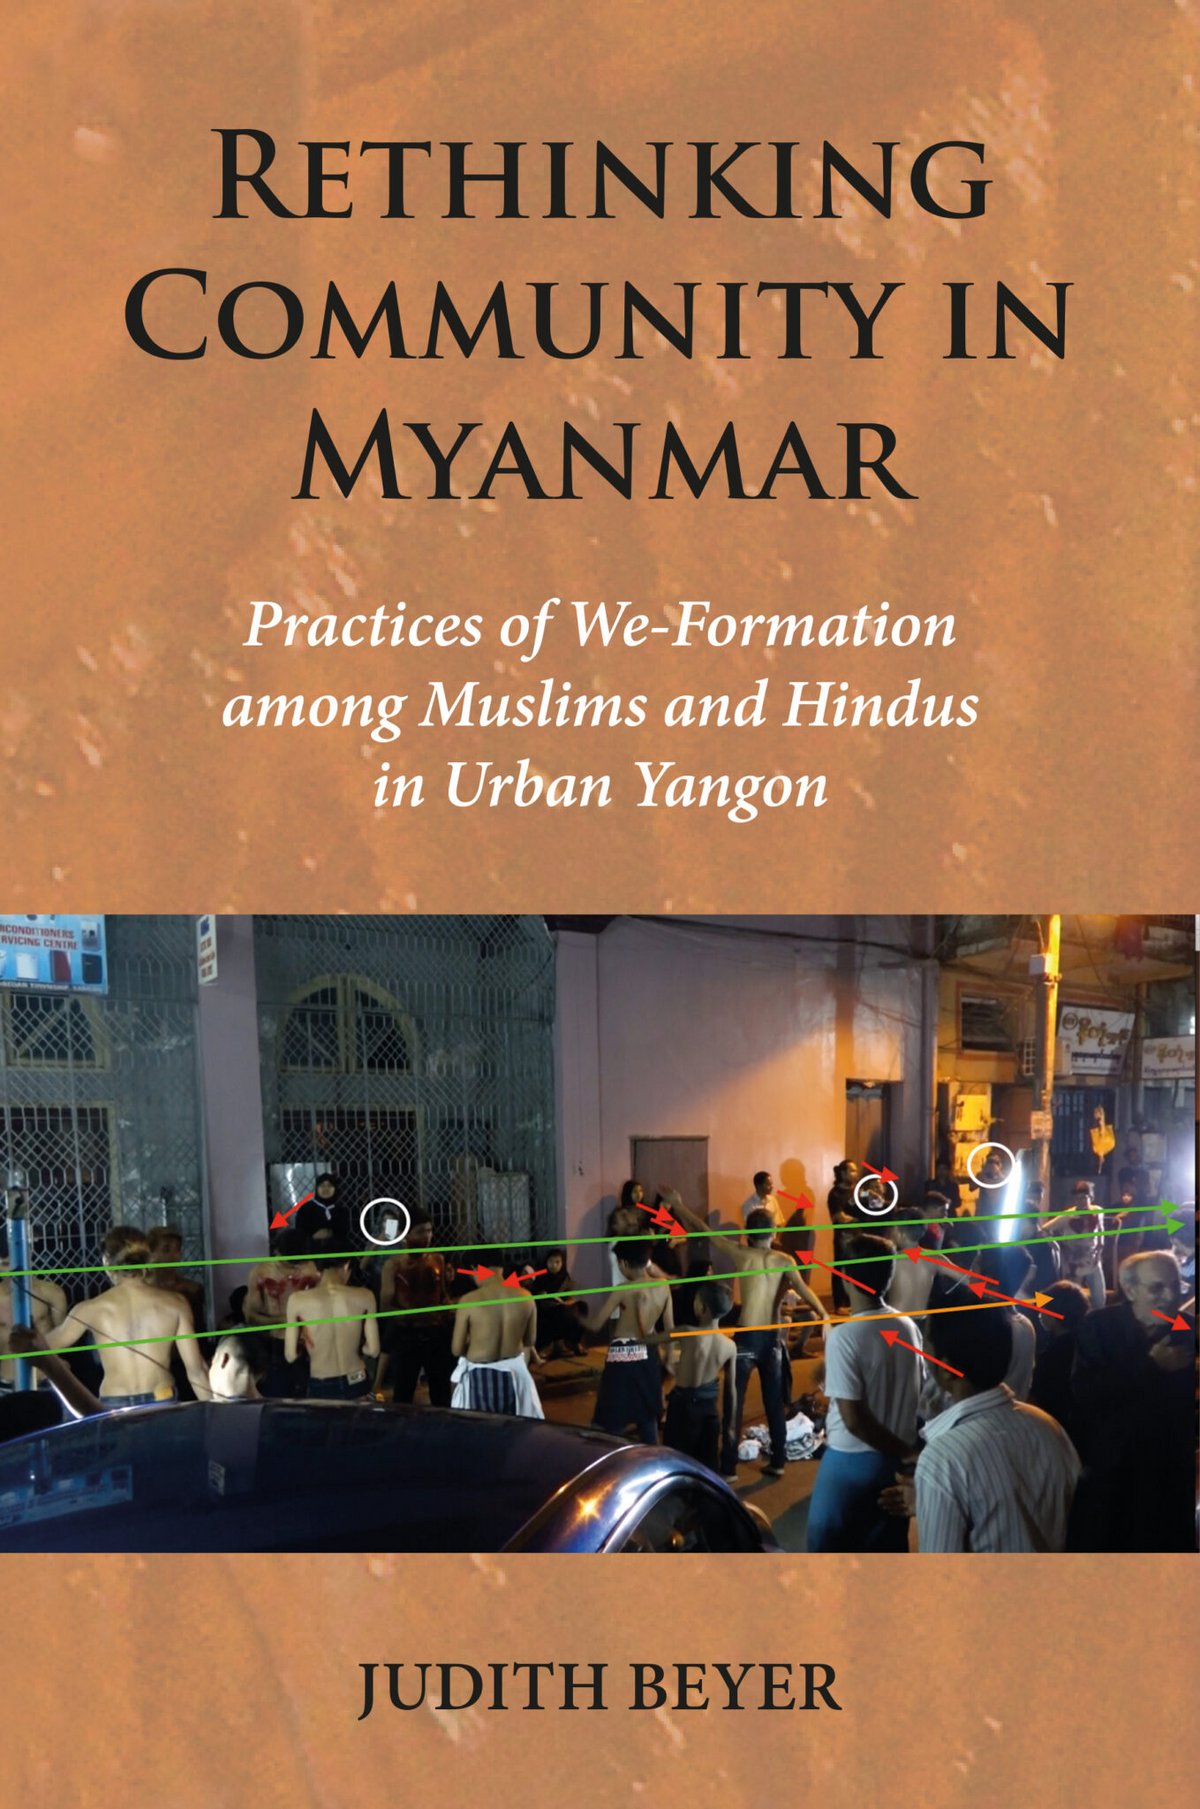 Book cover from "Rethinking community in Myanmar"